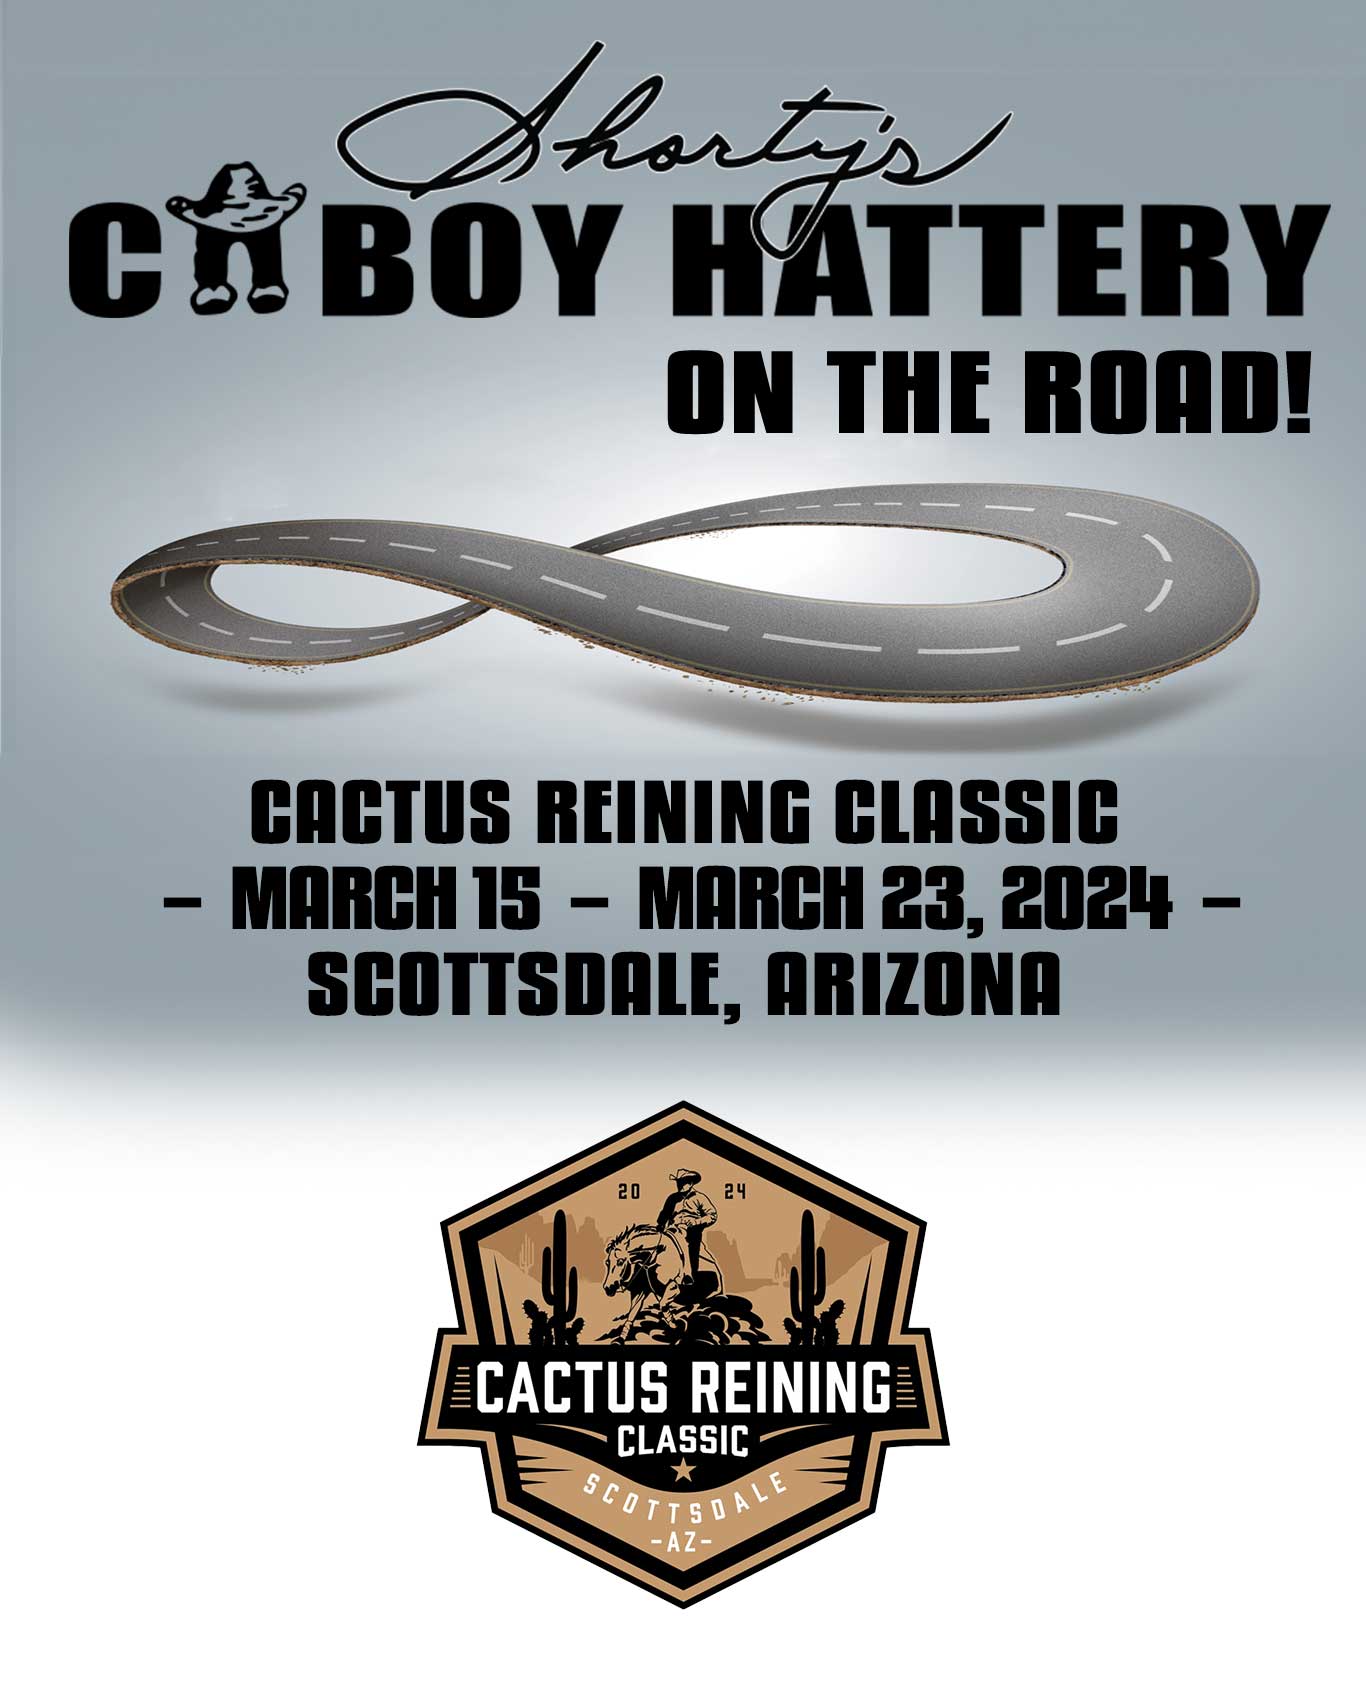 2024 Cactus Reining Classic Shorty's Caboy Hattery